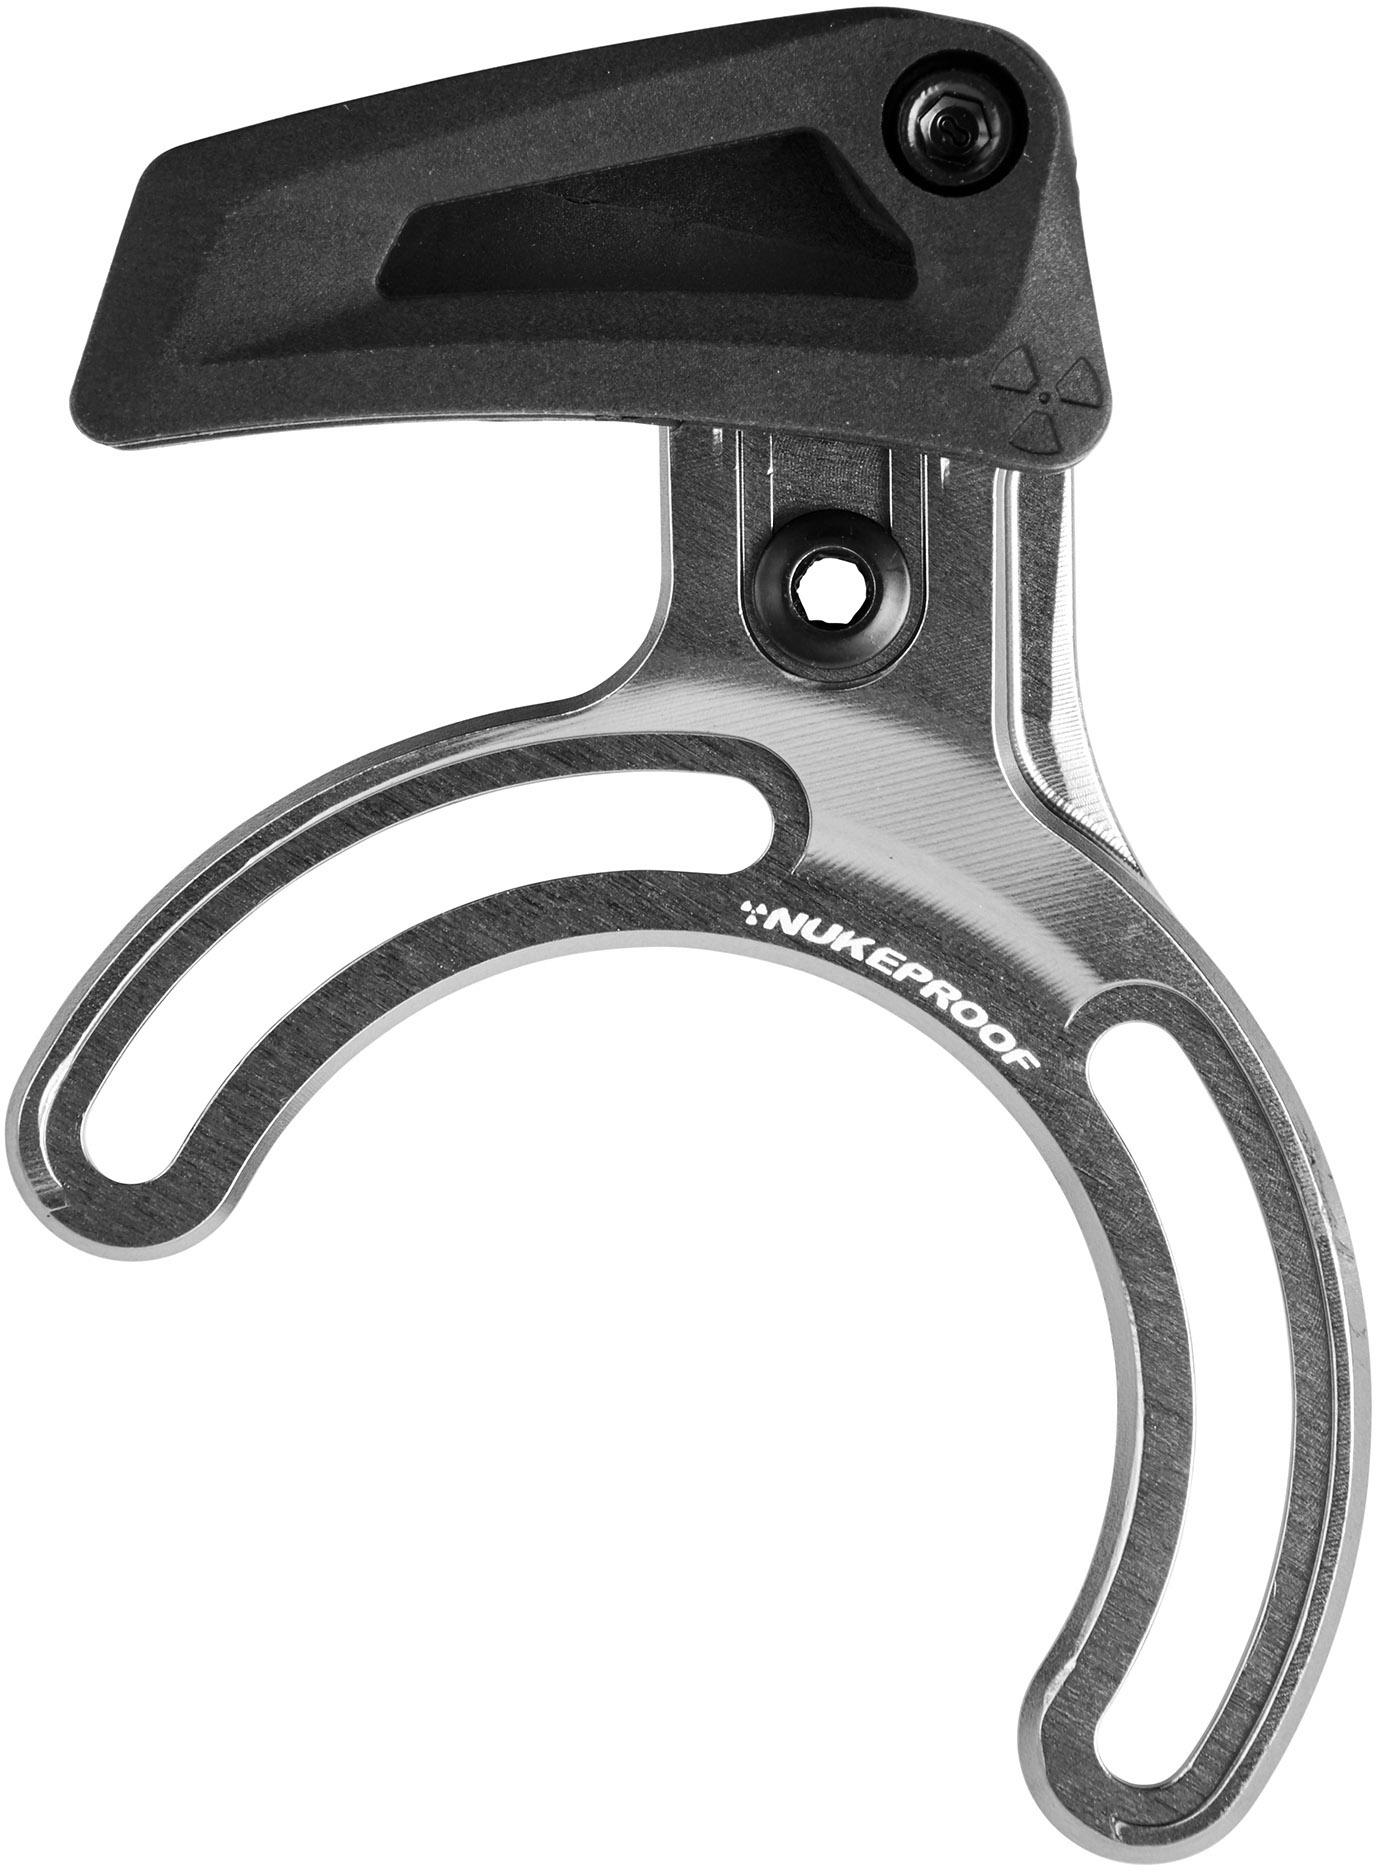 Nukeproof Shimano Steps Mount Chain Guide - Grey